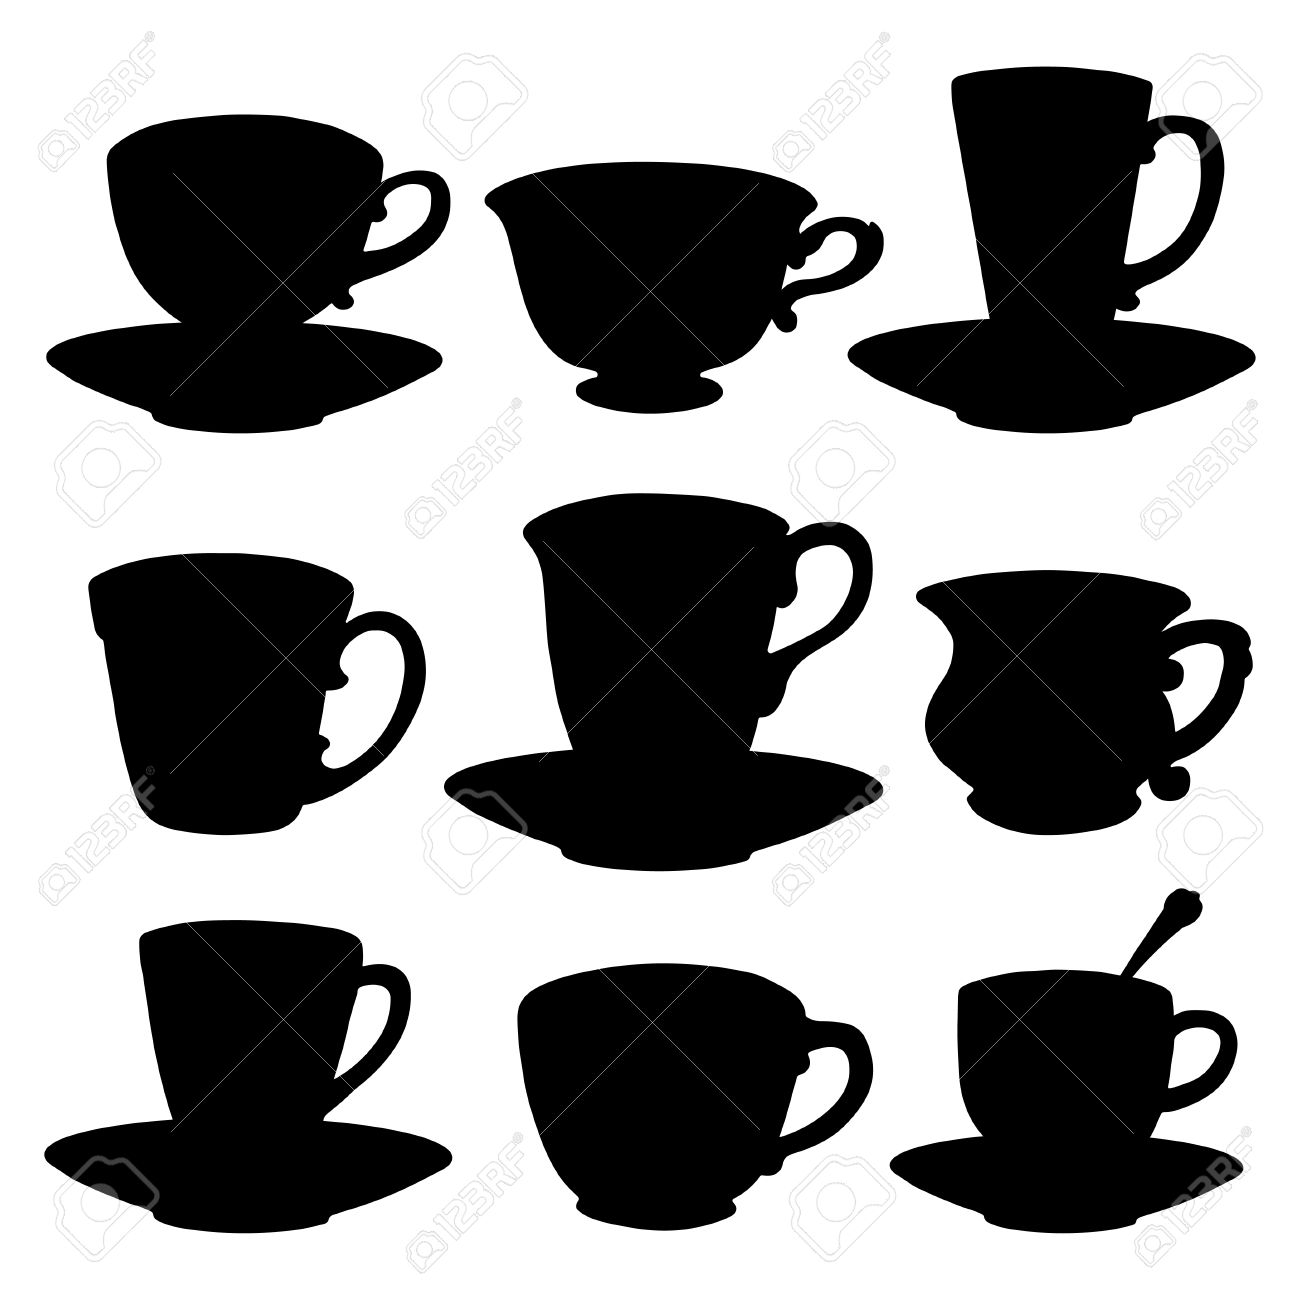 Icons set tea cups, coffee cups, spoon, saucer. Black silhouette isolated on a white background -Image source www.123rf.com